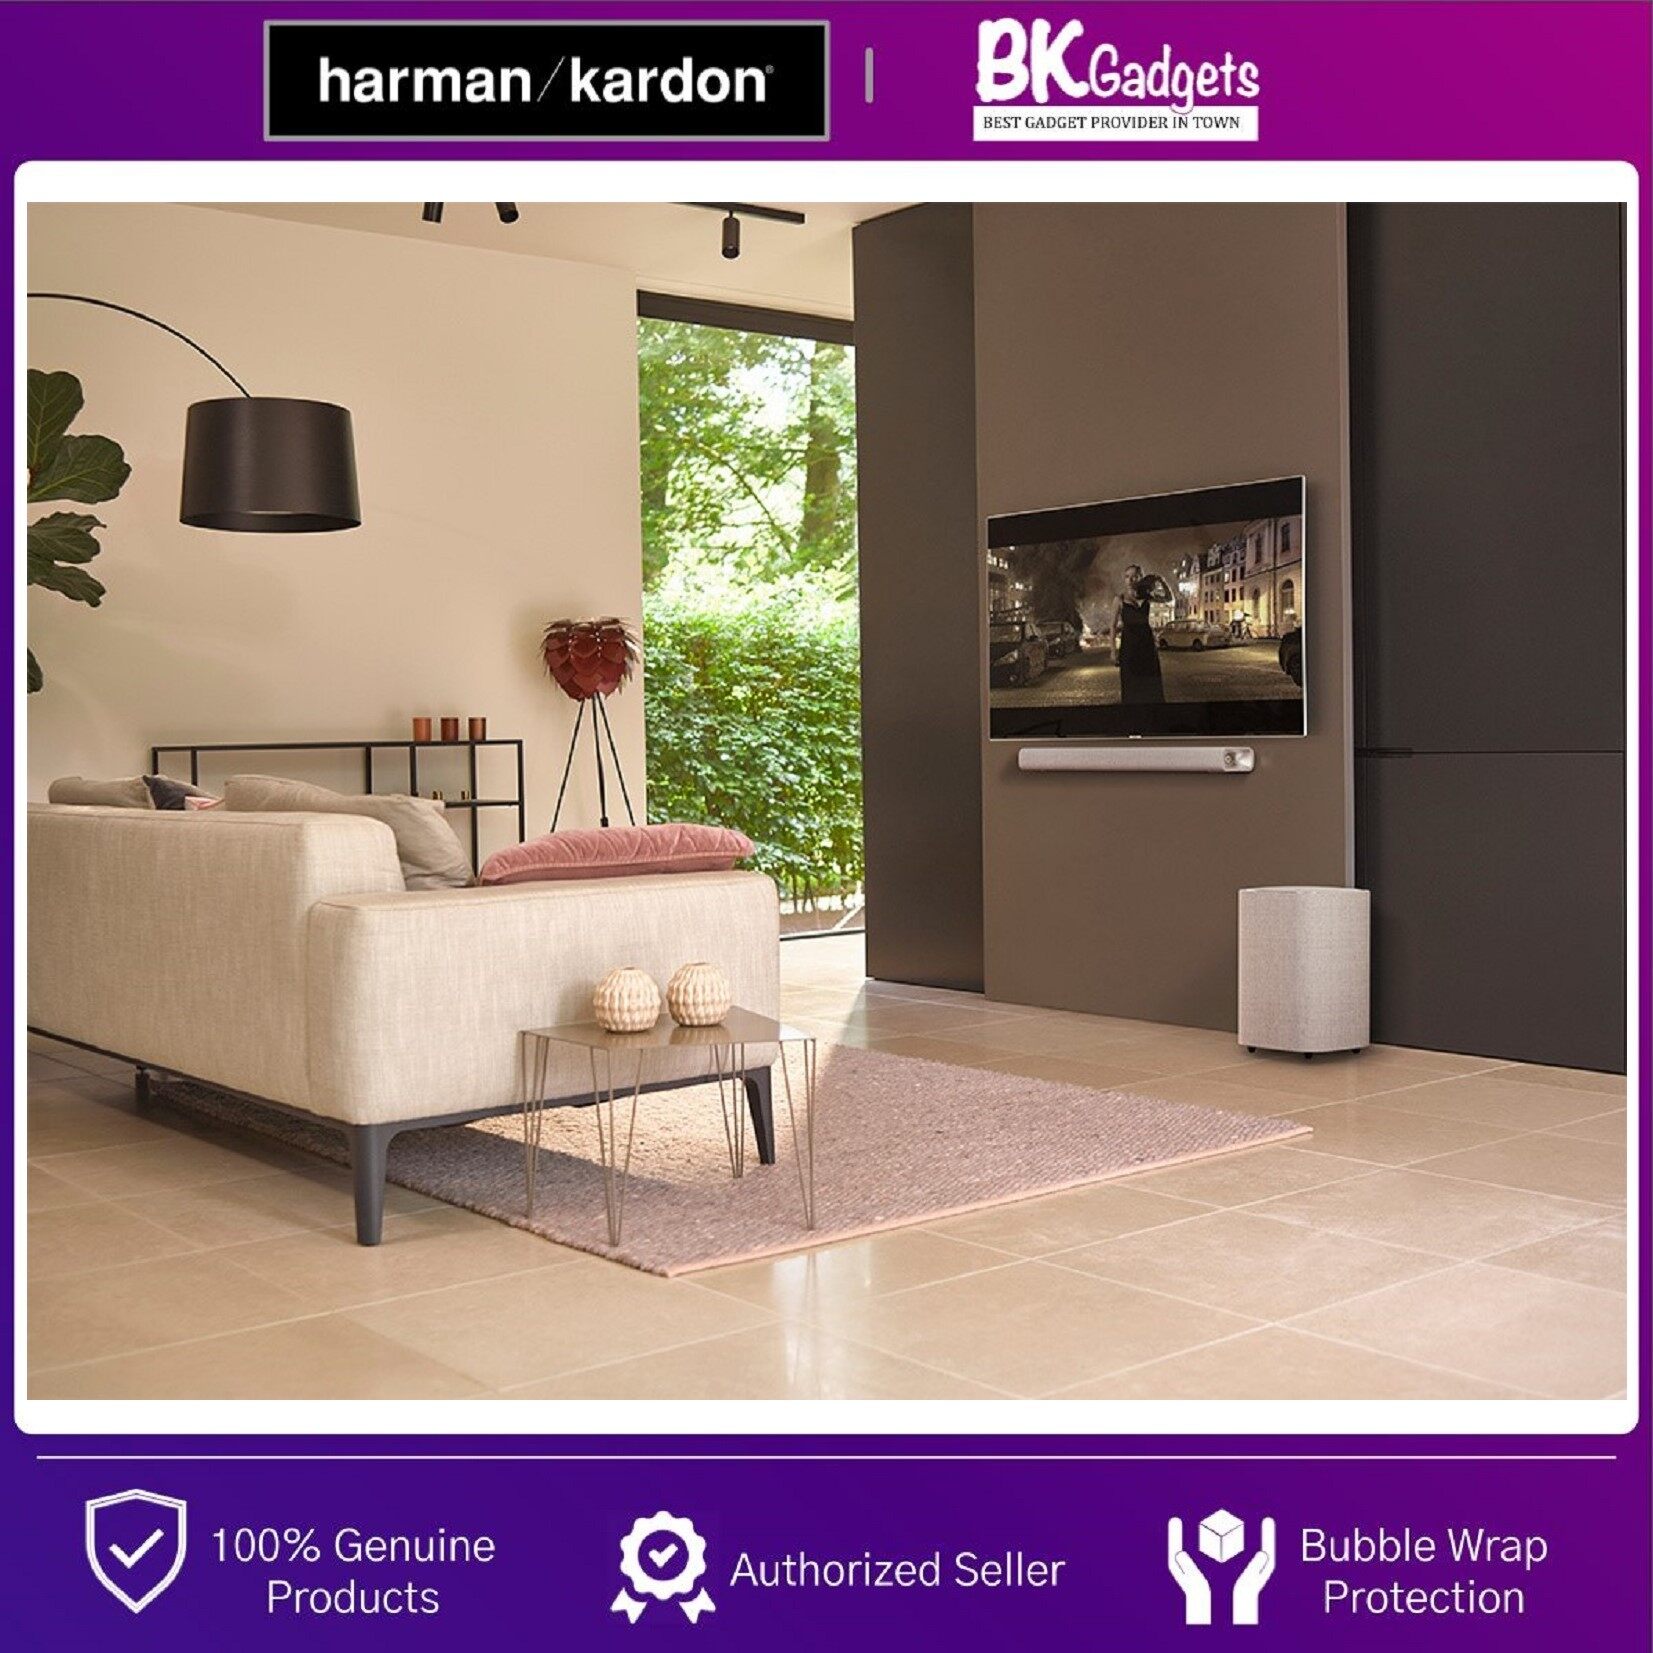 Harman Kardon Citation Sub S Compact Wireless Subwoofer with Deep Bass | Easy Setup with Wireless Connectivity